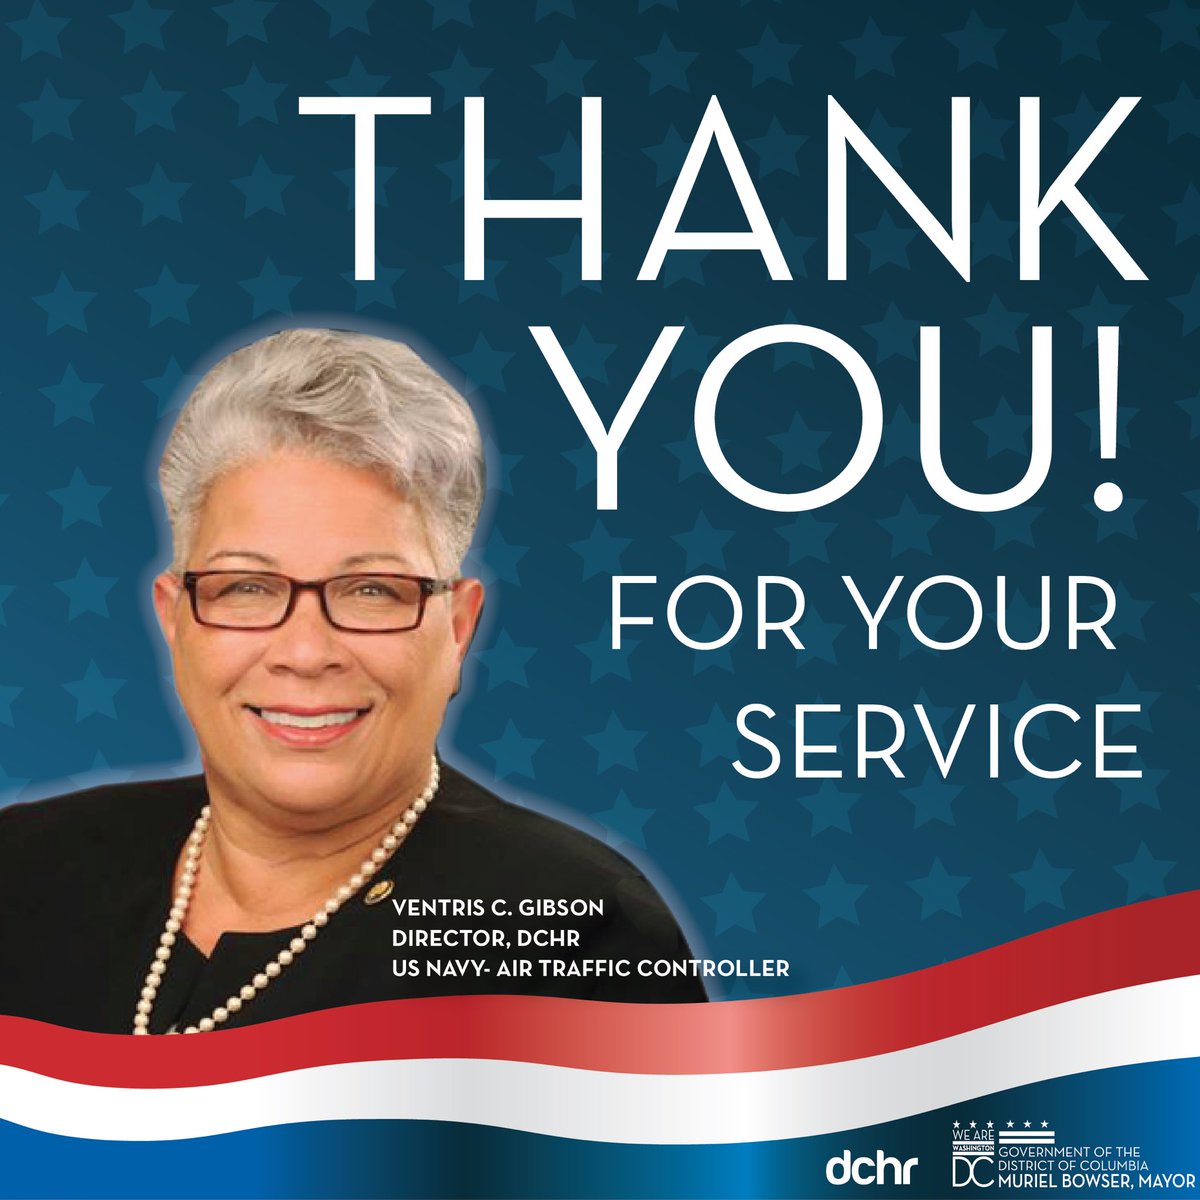 In honor of Veterans Day, Director @Ventris2, we thank you for your service to our country and our great city. We salute you!#ThankAVetDC